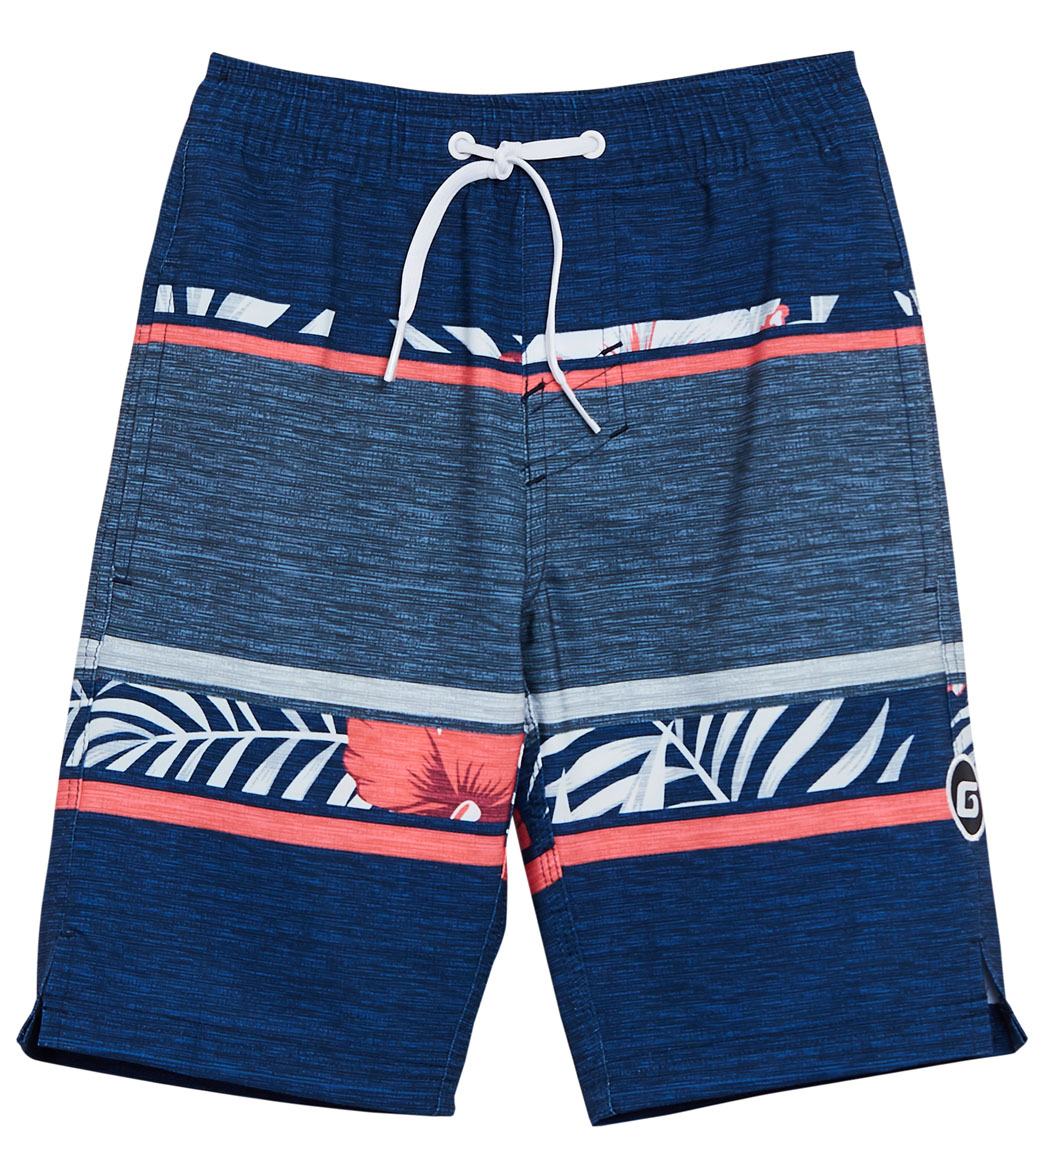 Grom boys' top side elastic boardshorts big kid - charcoal x-small 4/5 polyester/spandex - swimoutlet.com